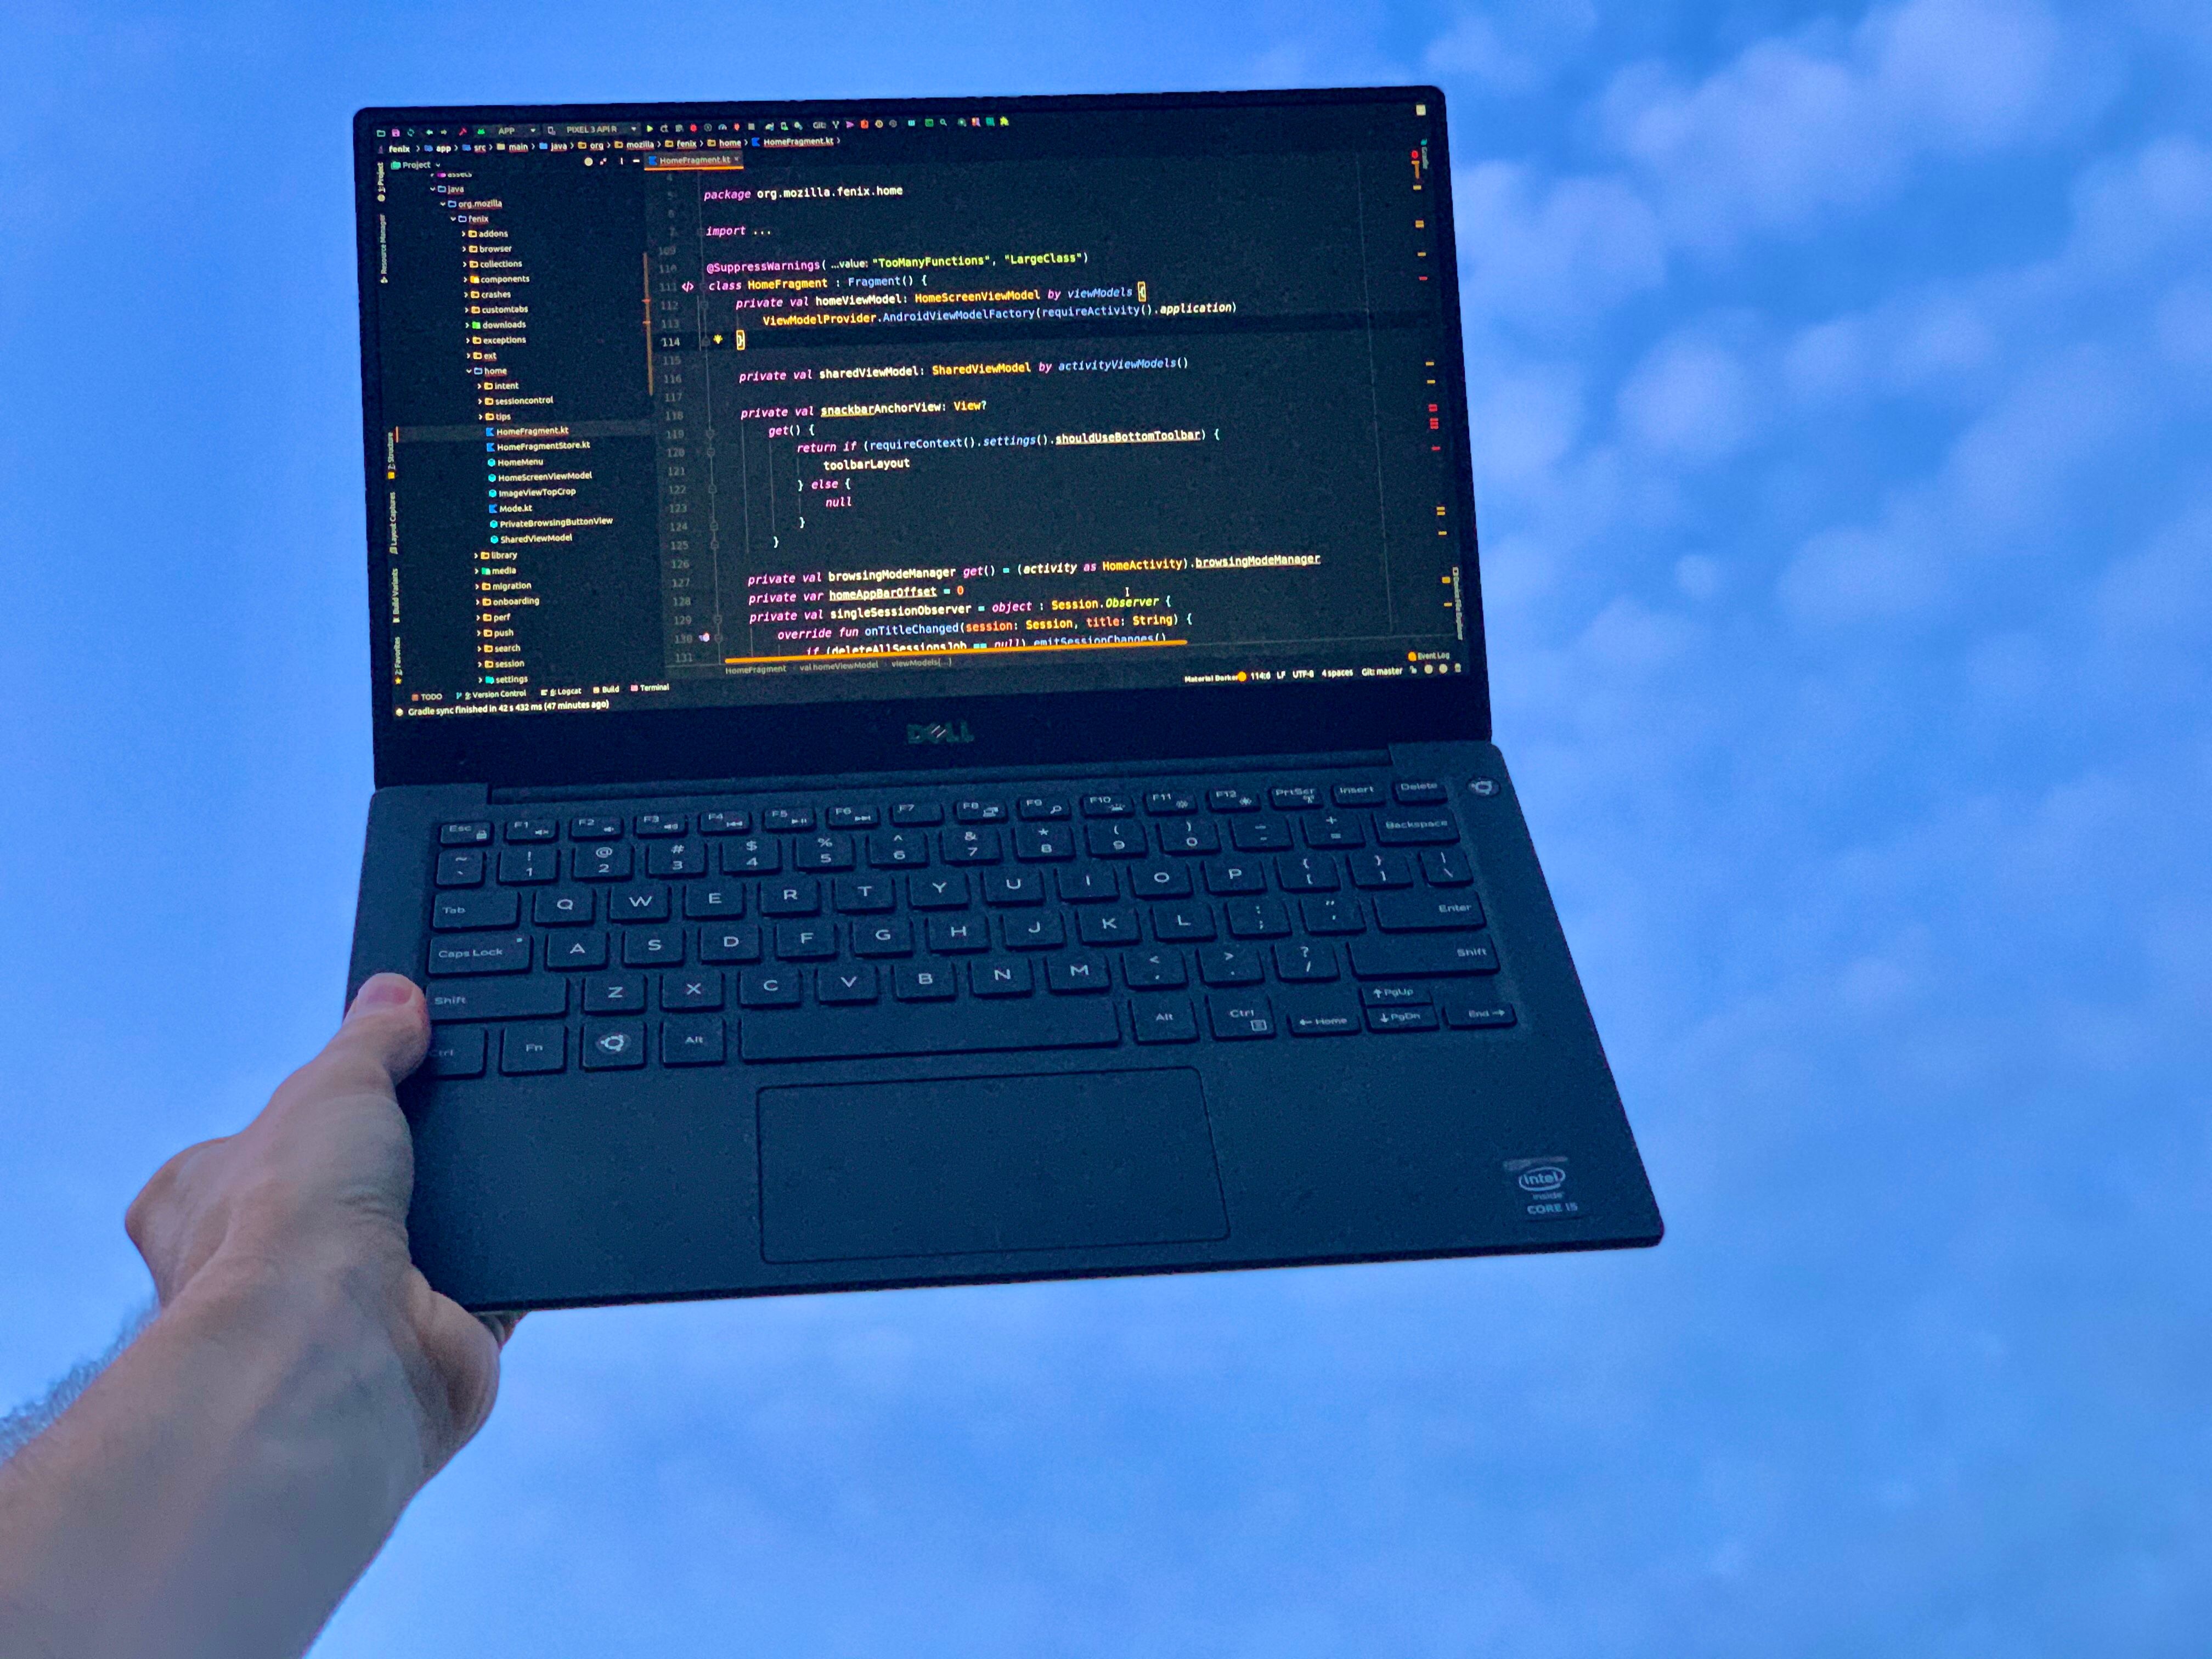 Holding up a laptop with one hand using the sky as a backdrop. The laptop is displaying kotlin code from the Firefox Fenix project.